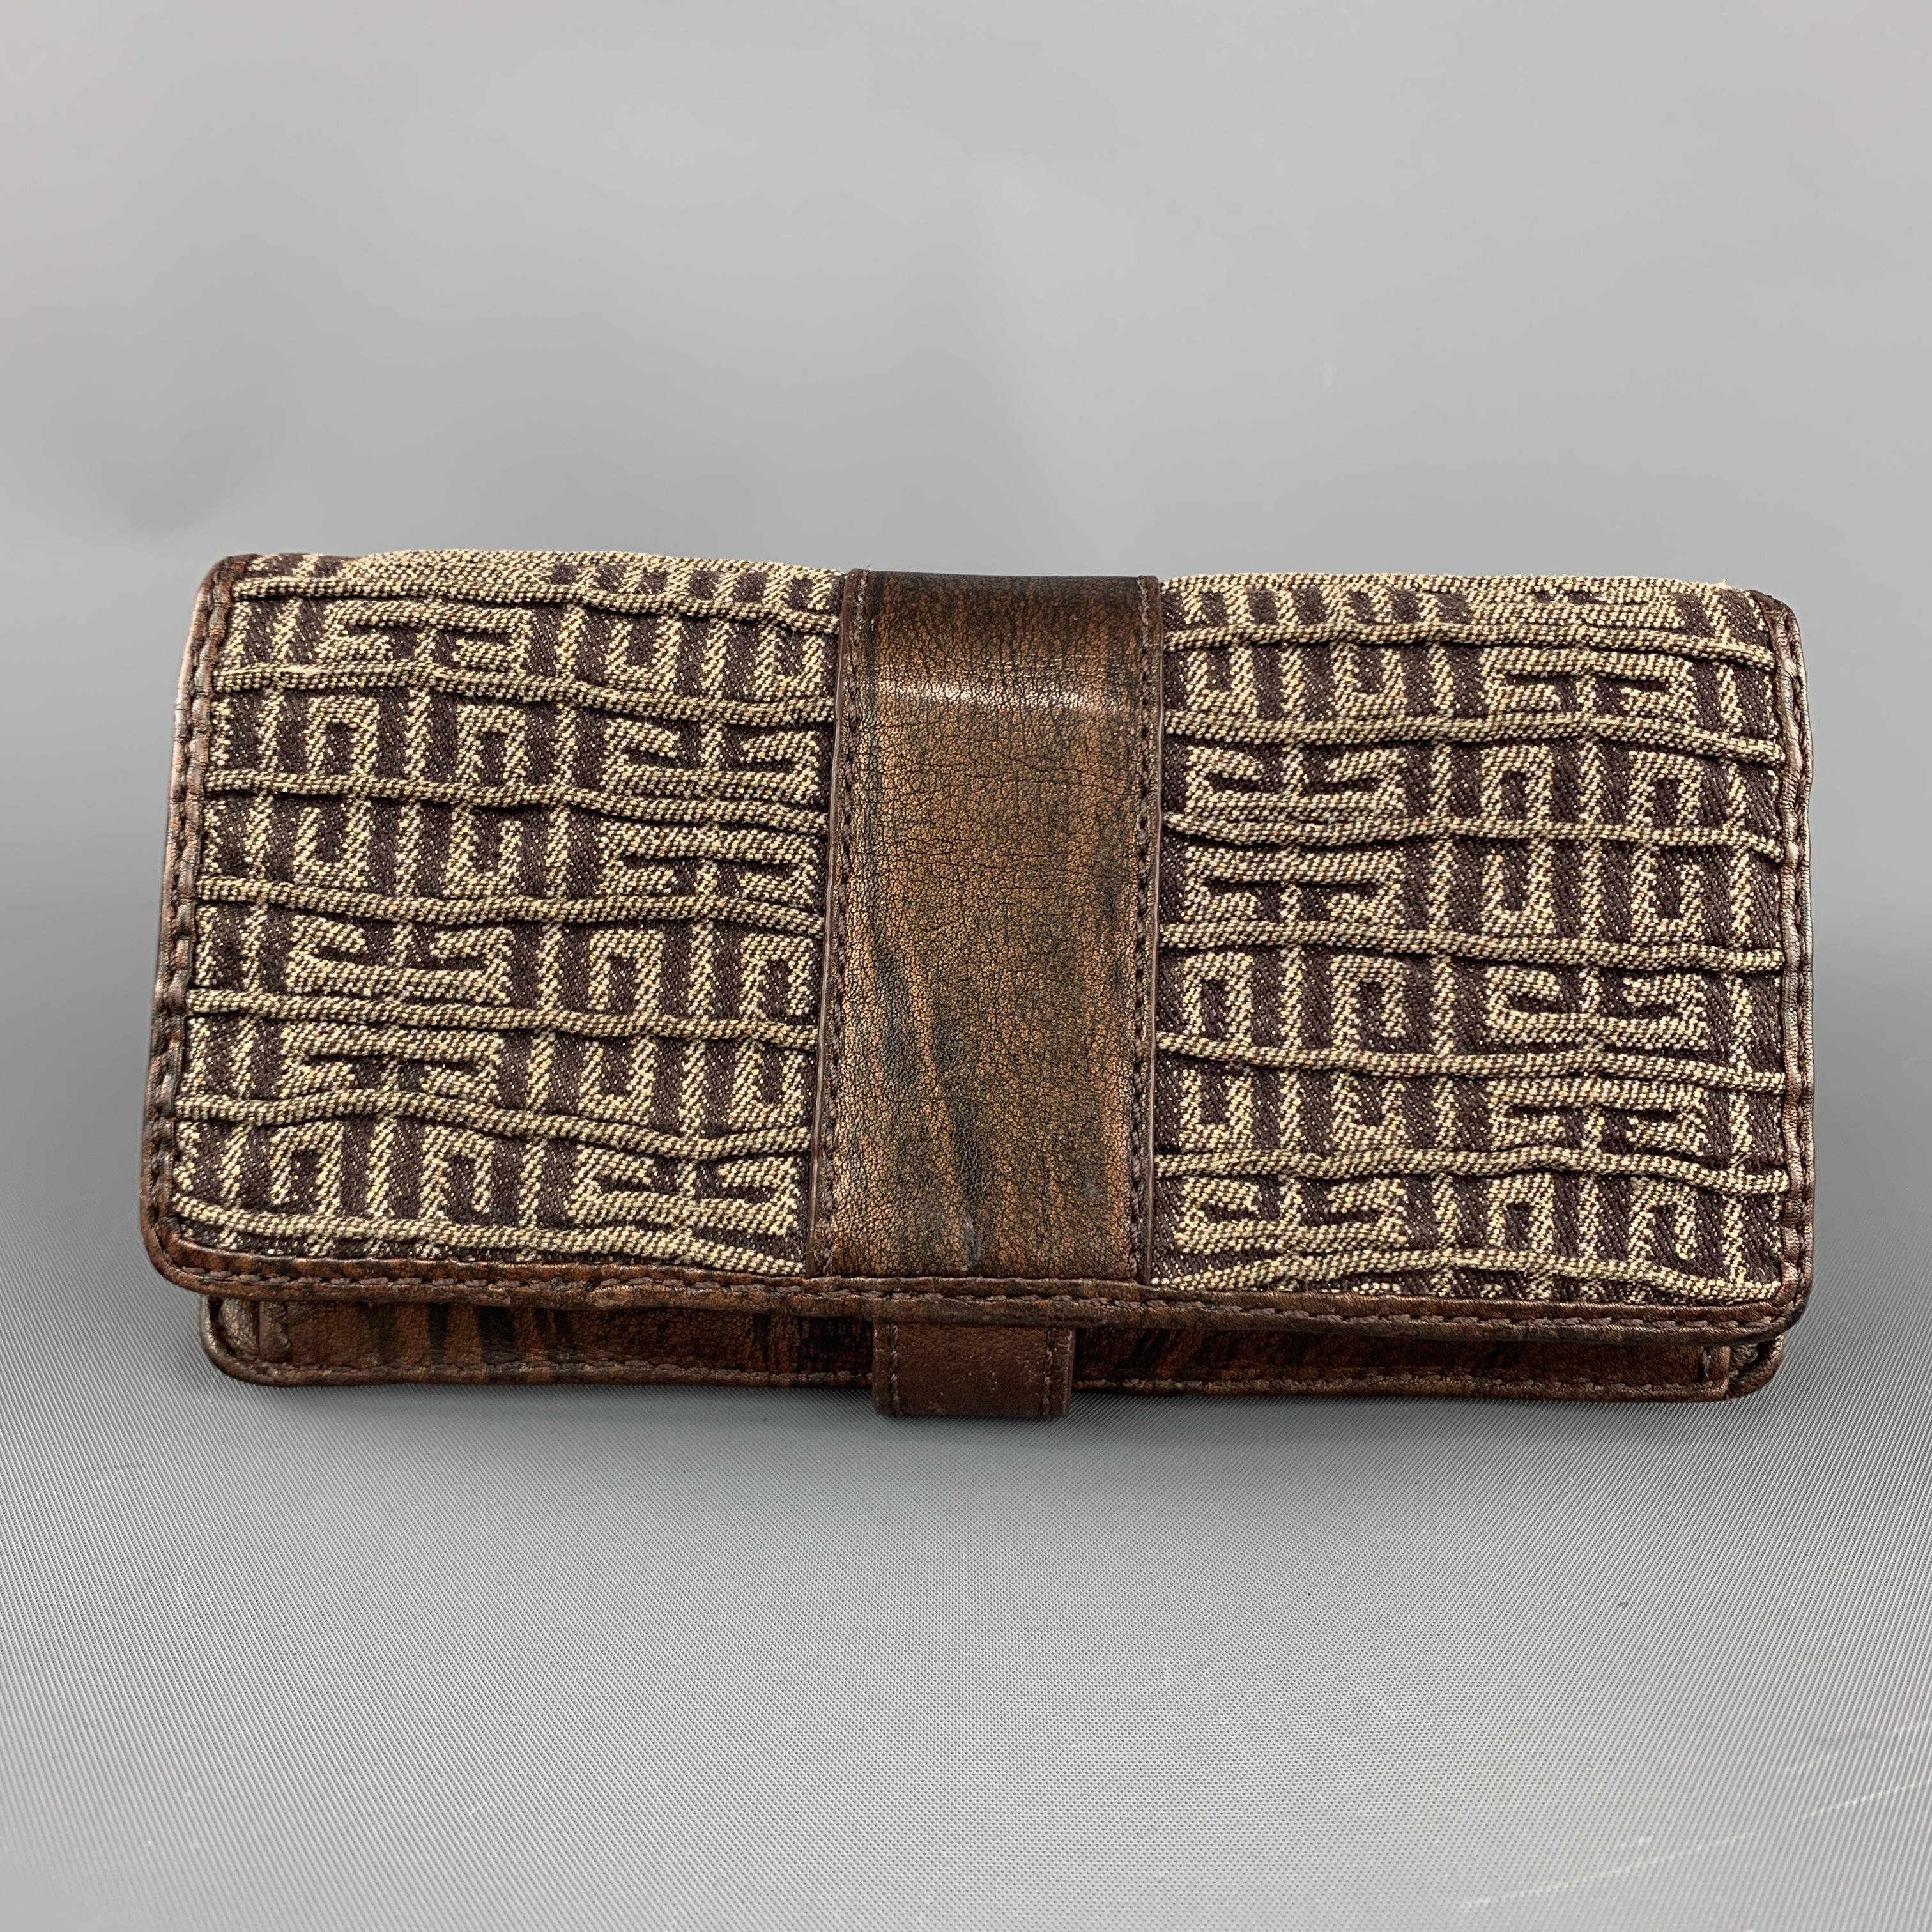 GIVENCHY bifold wallet comes in gathered GG monogram sparkly gold canvas with brown leather piping, snap strap closure with gold tone hoop, and brown leather interior storage. 

Excellent Pre-Owned Condition.

Measurements:

Length: 7.75 in.
Width: